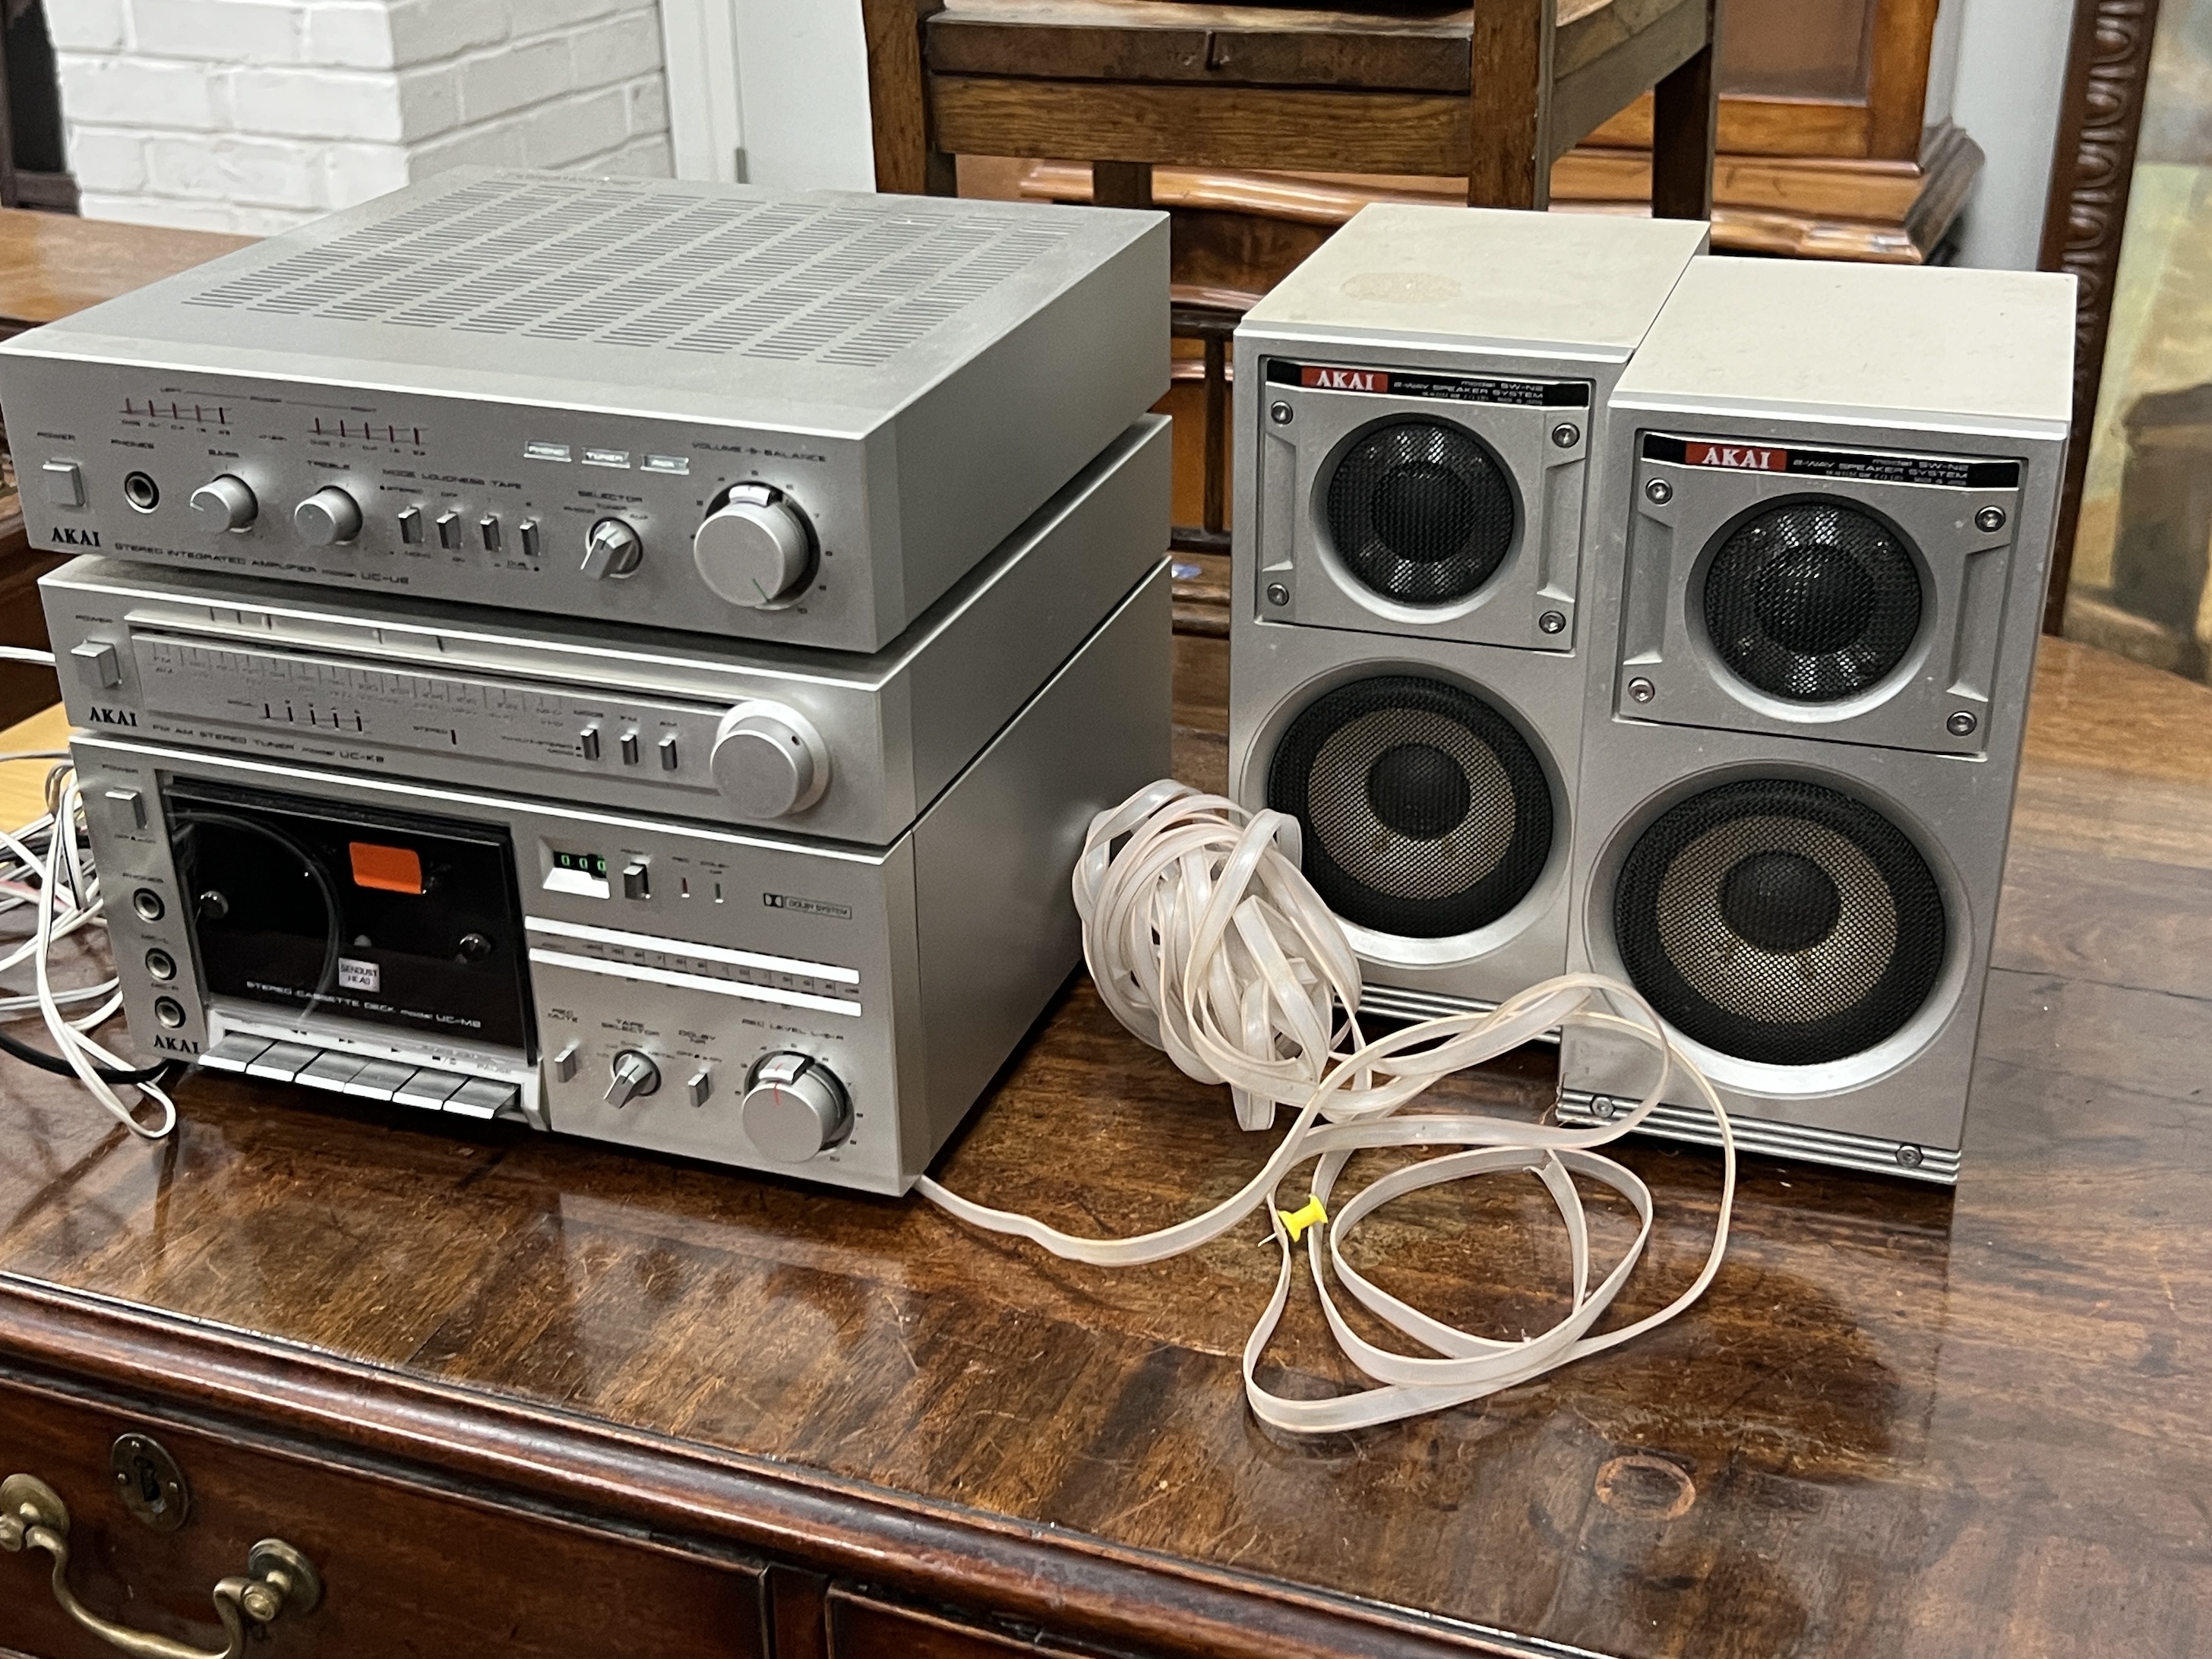 A pair of 'Aegis Two' loudspeakers, height 84cm and an Akai UC series Amplifier, Tuner, Cassette Deck and Speakers.